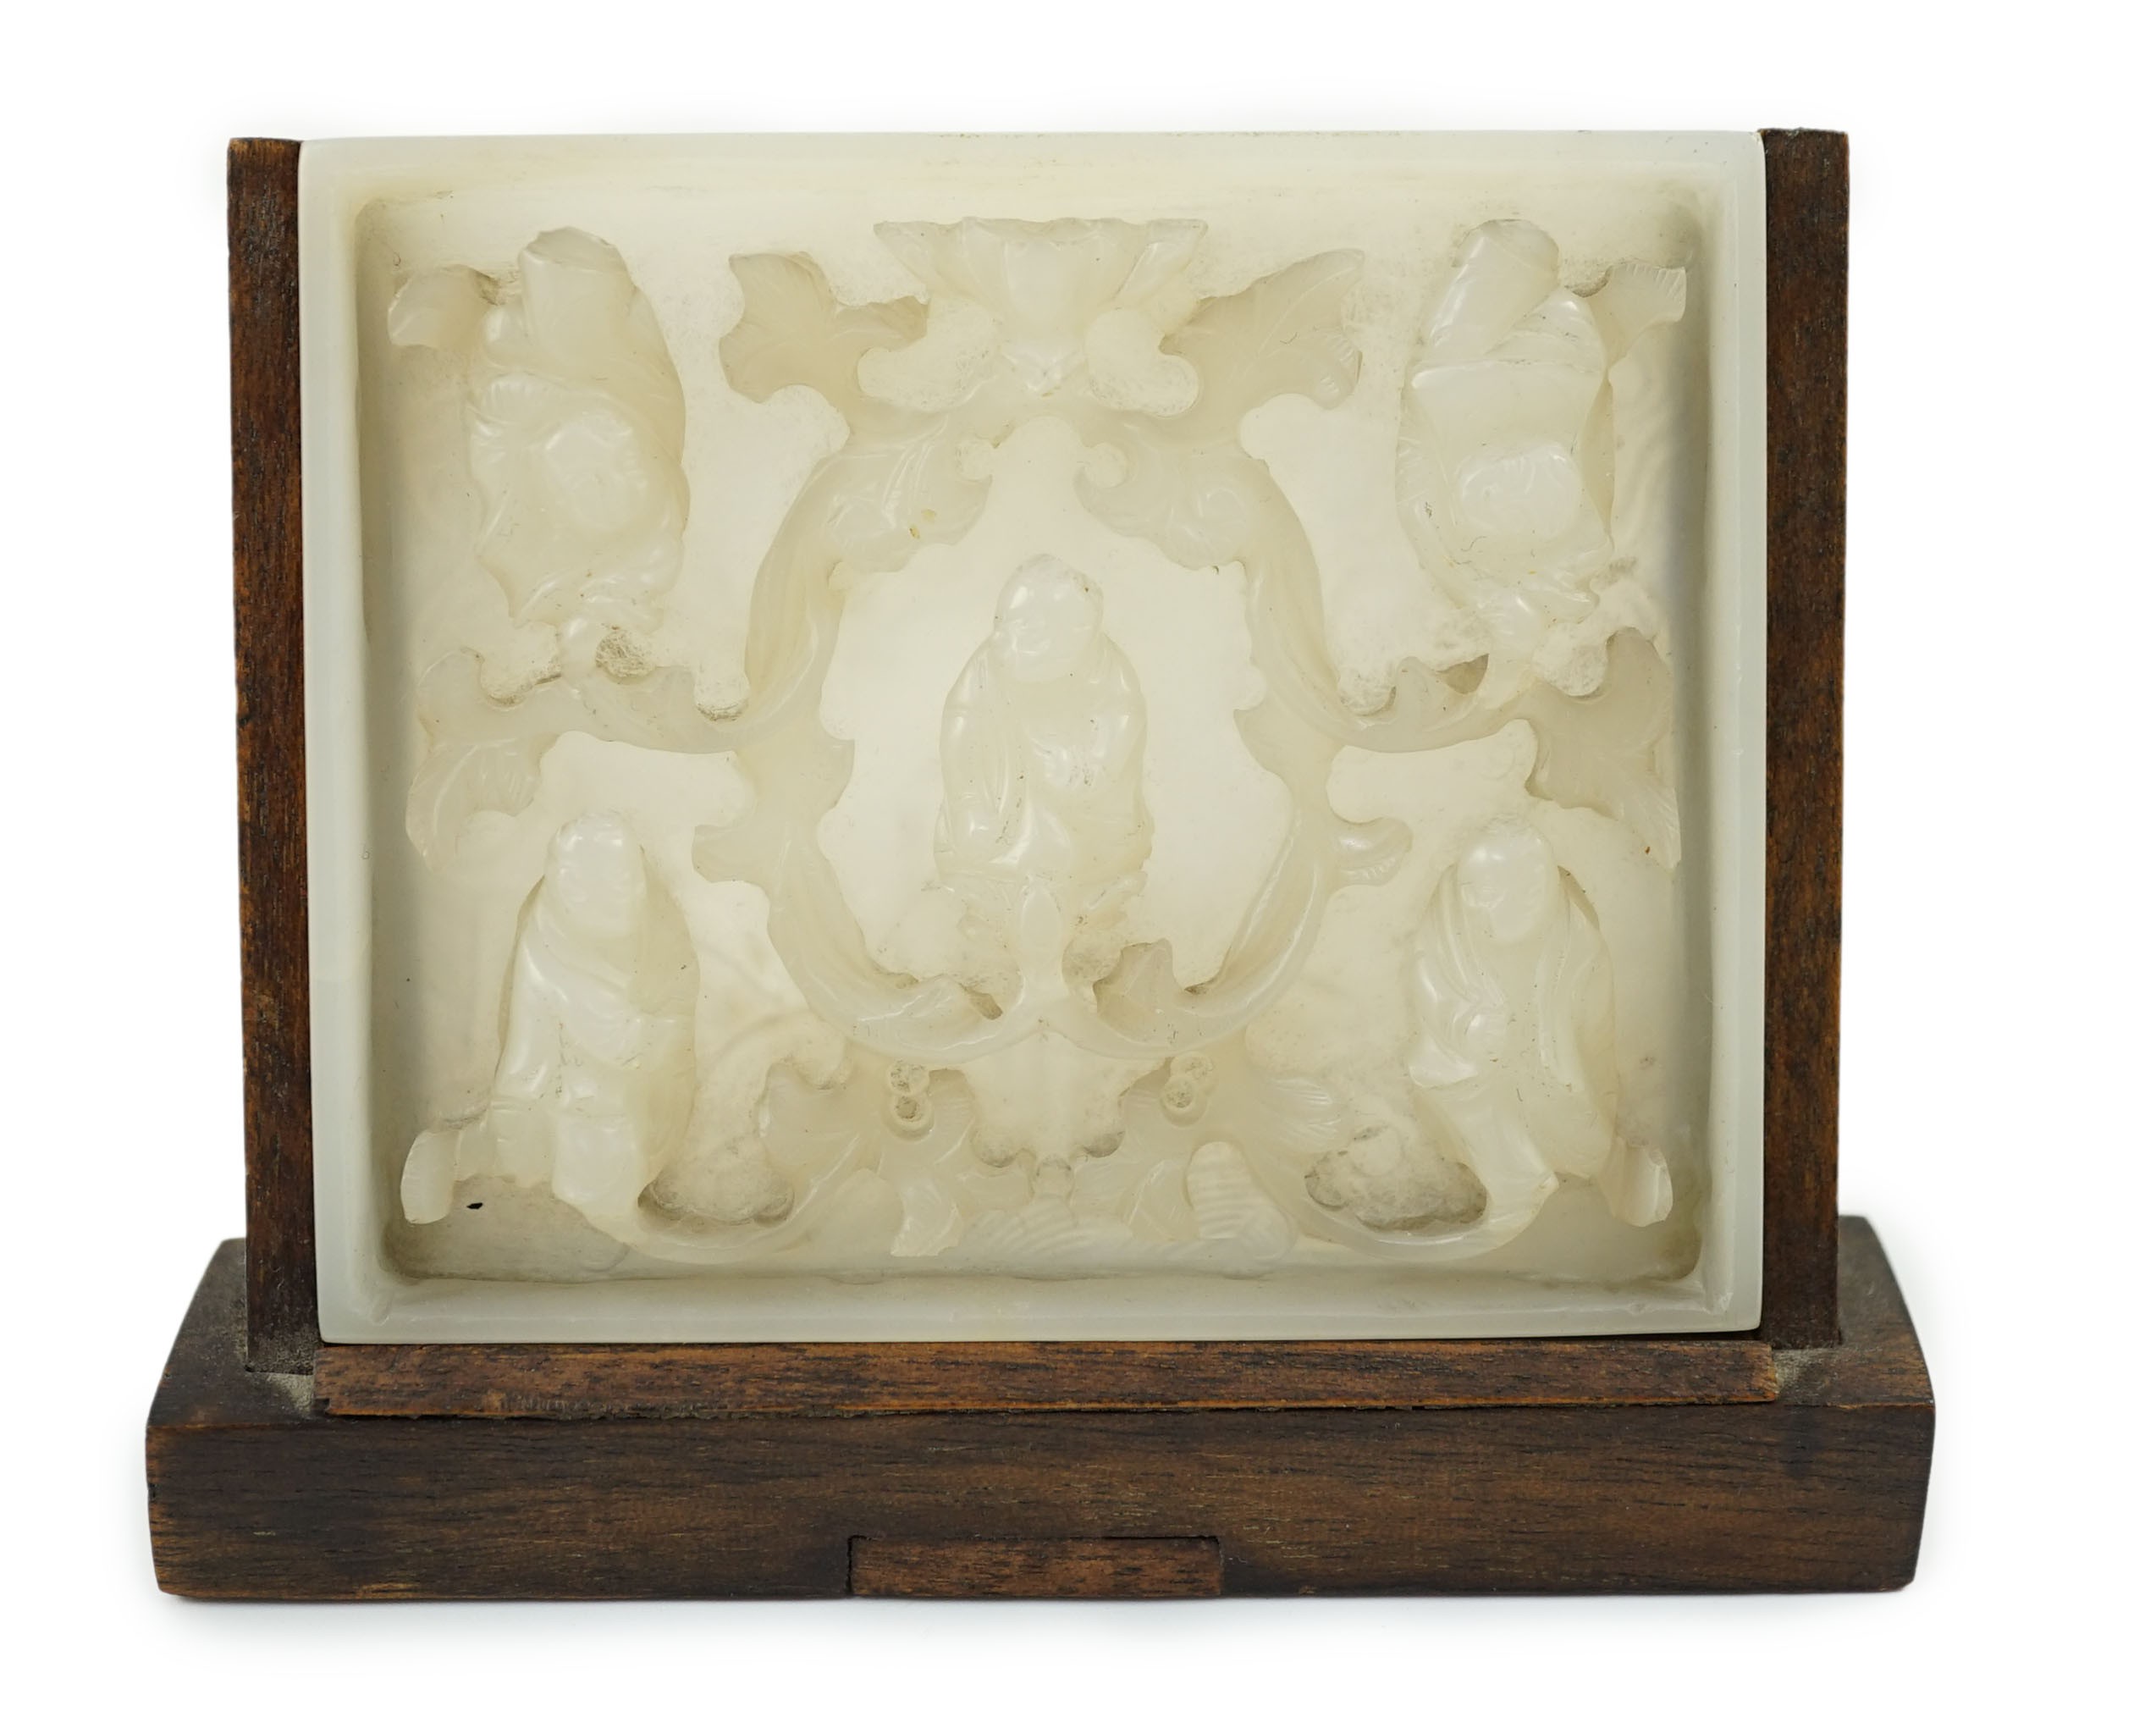 An unusual Chinese white jade plaque, 18th/19th century, carved in high relief with three seated